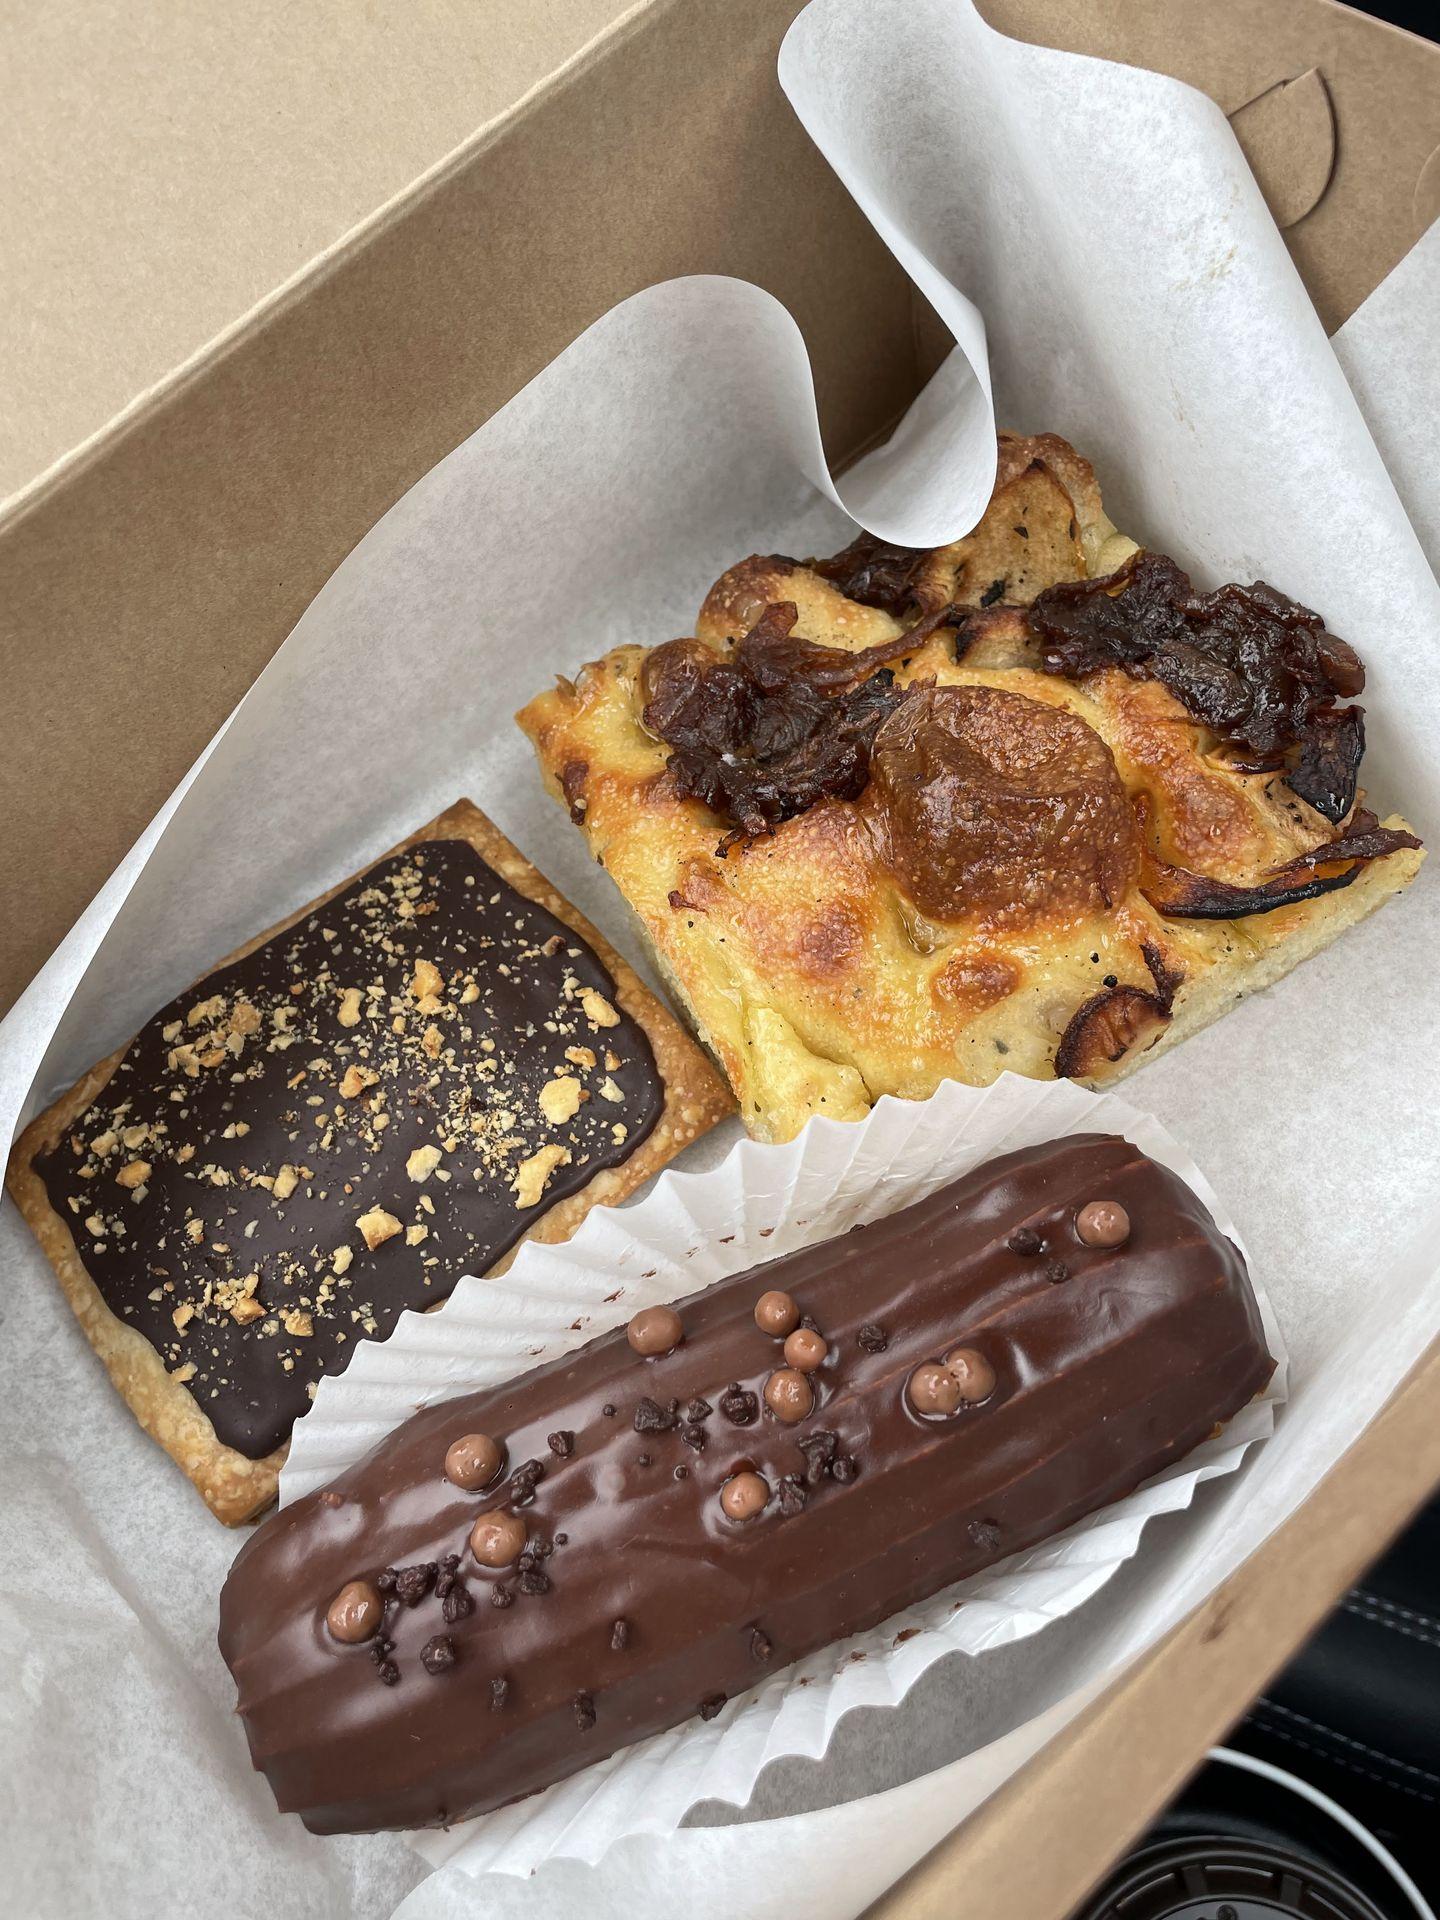 Three pastires in a to-go box. There is a chocolate eclair, a chocolate pop tart and focaccia bread.